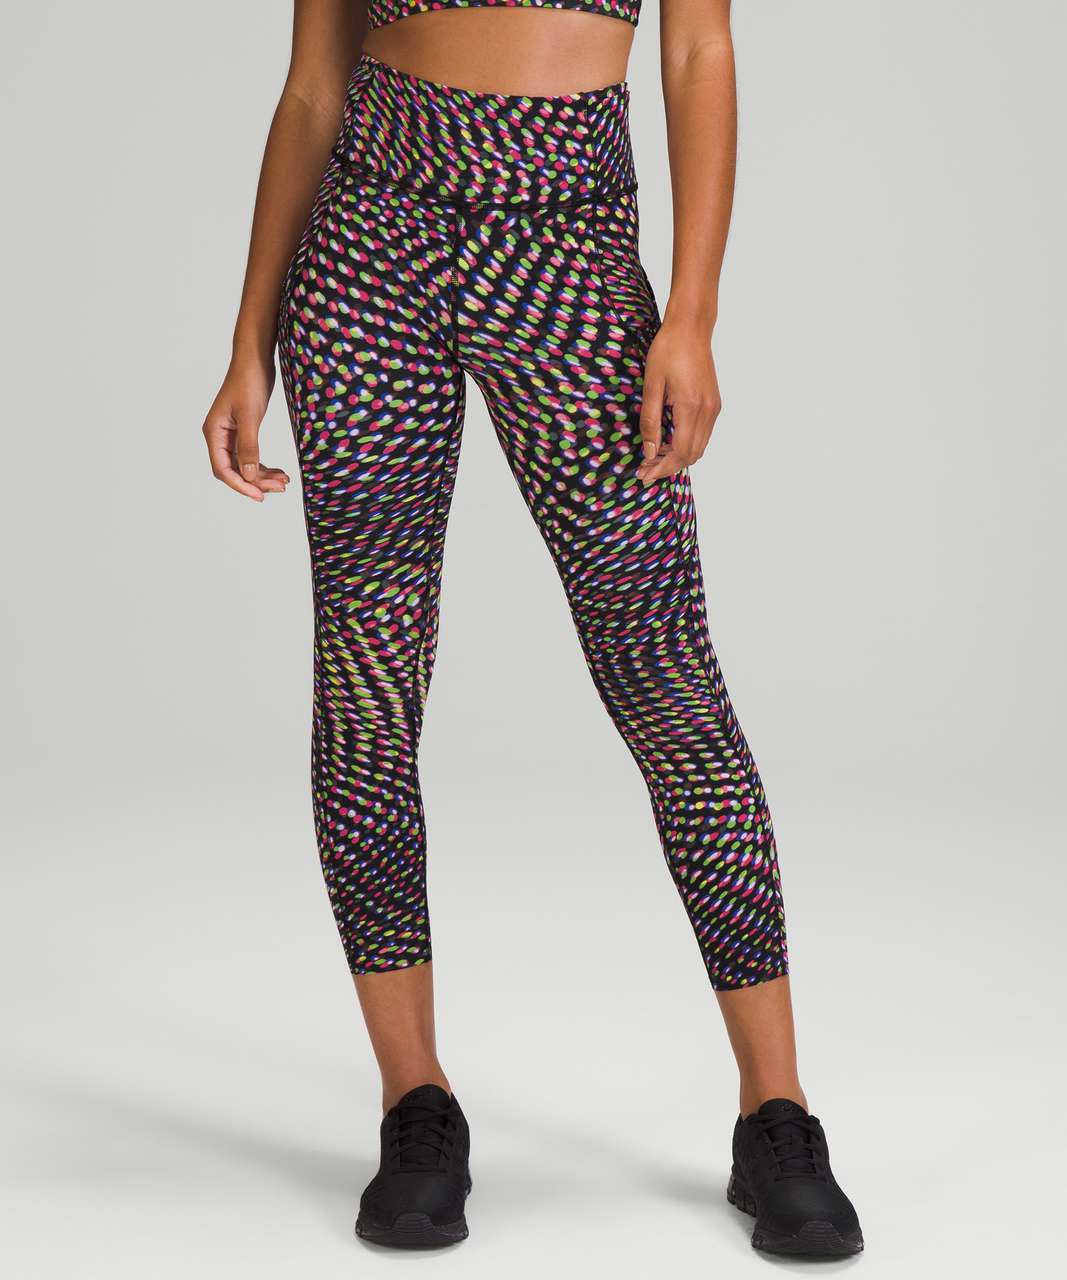 Lululemon SeaWheeze Fast and Free High-Rise Tight 25" - To The Beat Raspberry Multi